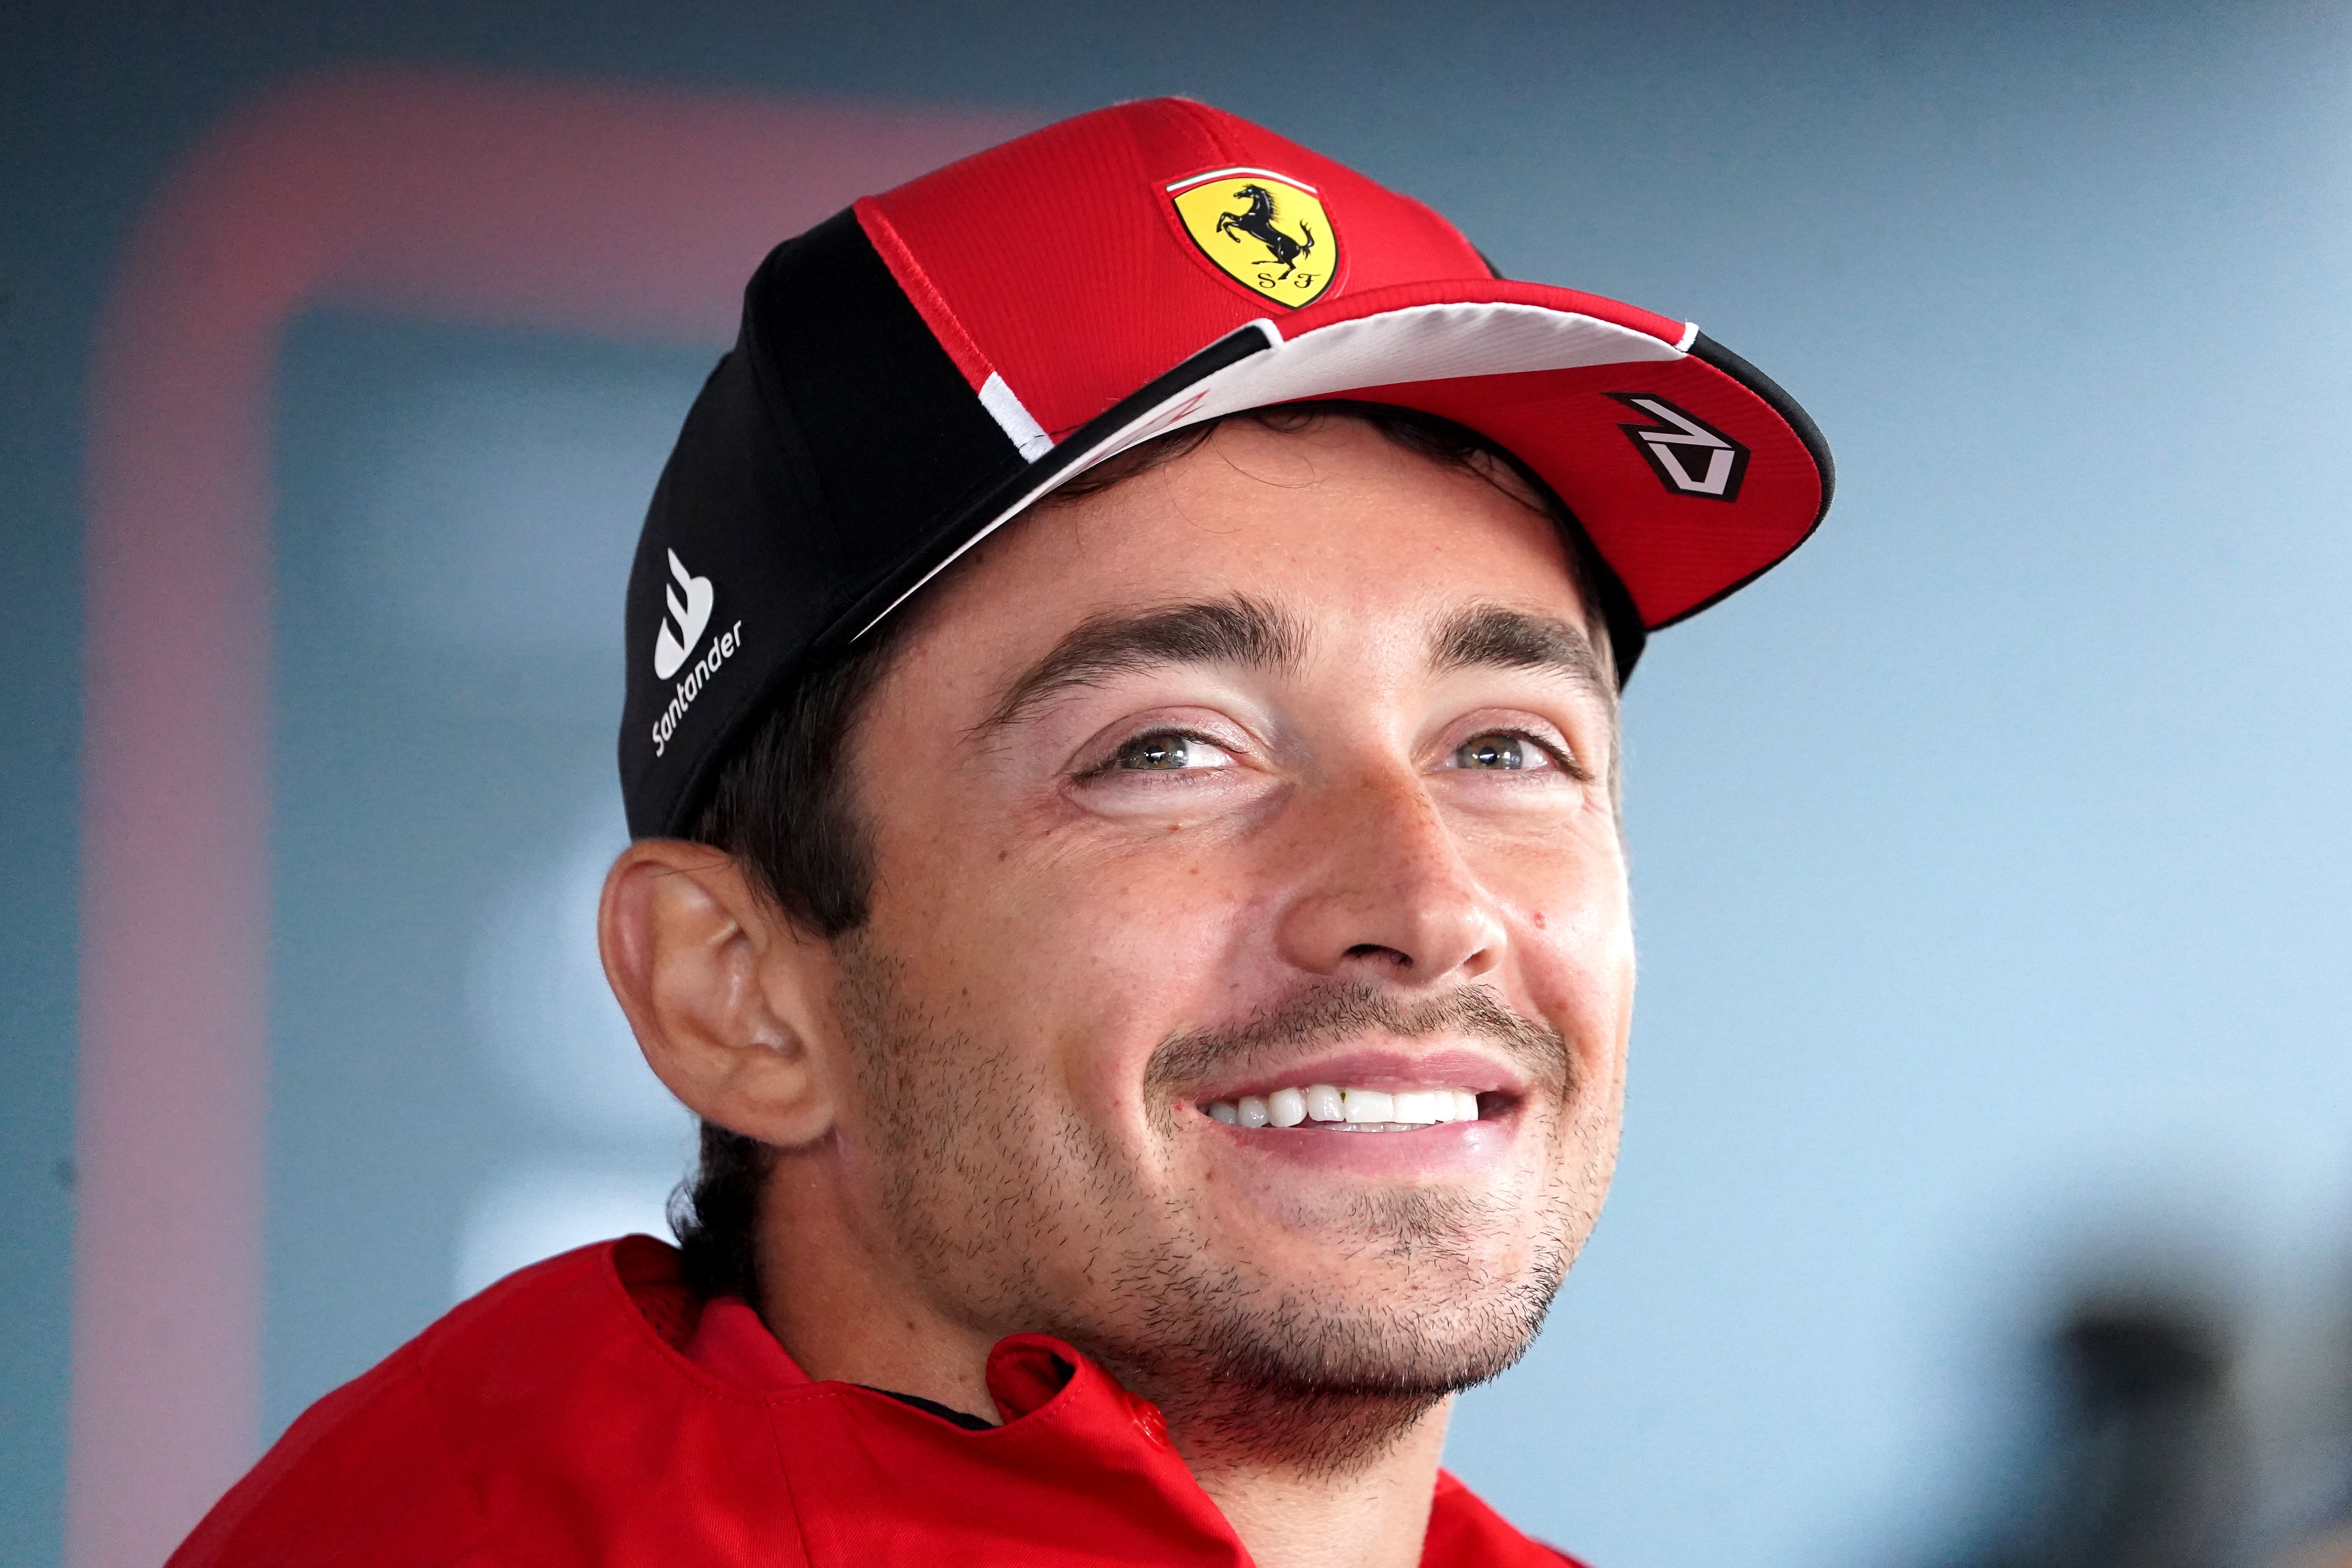 Charles Leclerc has signed a new deal with Ferrari (Tim Goode/PA)